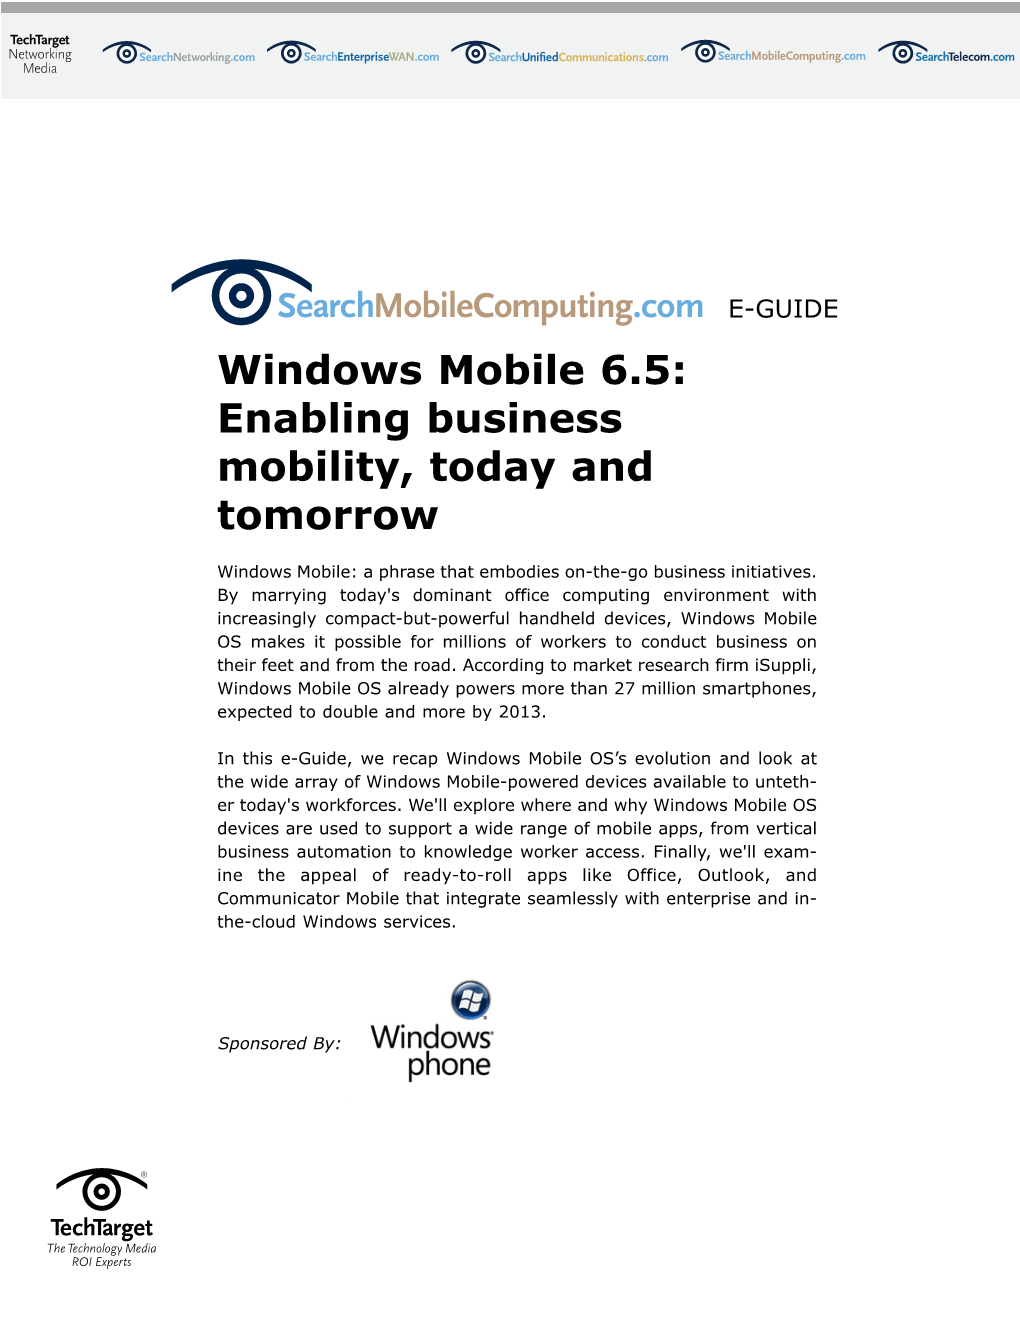 Windows Mobile 6.5: Enabling Business Mobility, Today and Tomorrow